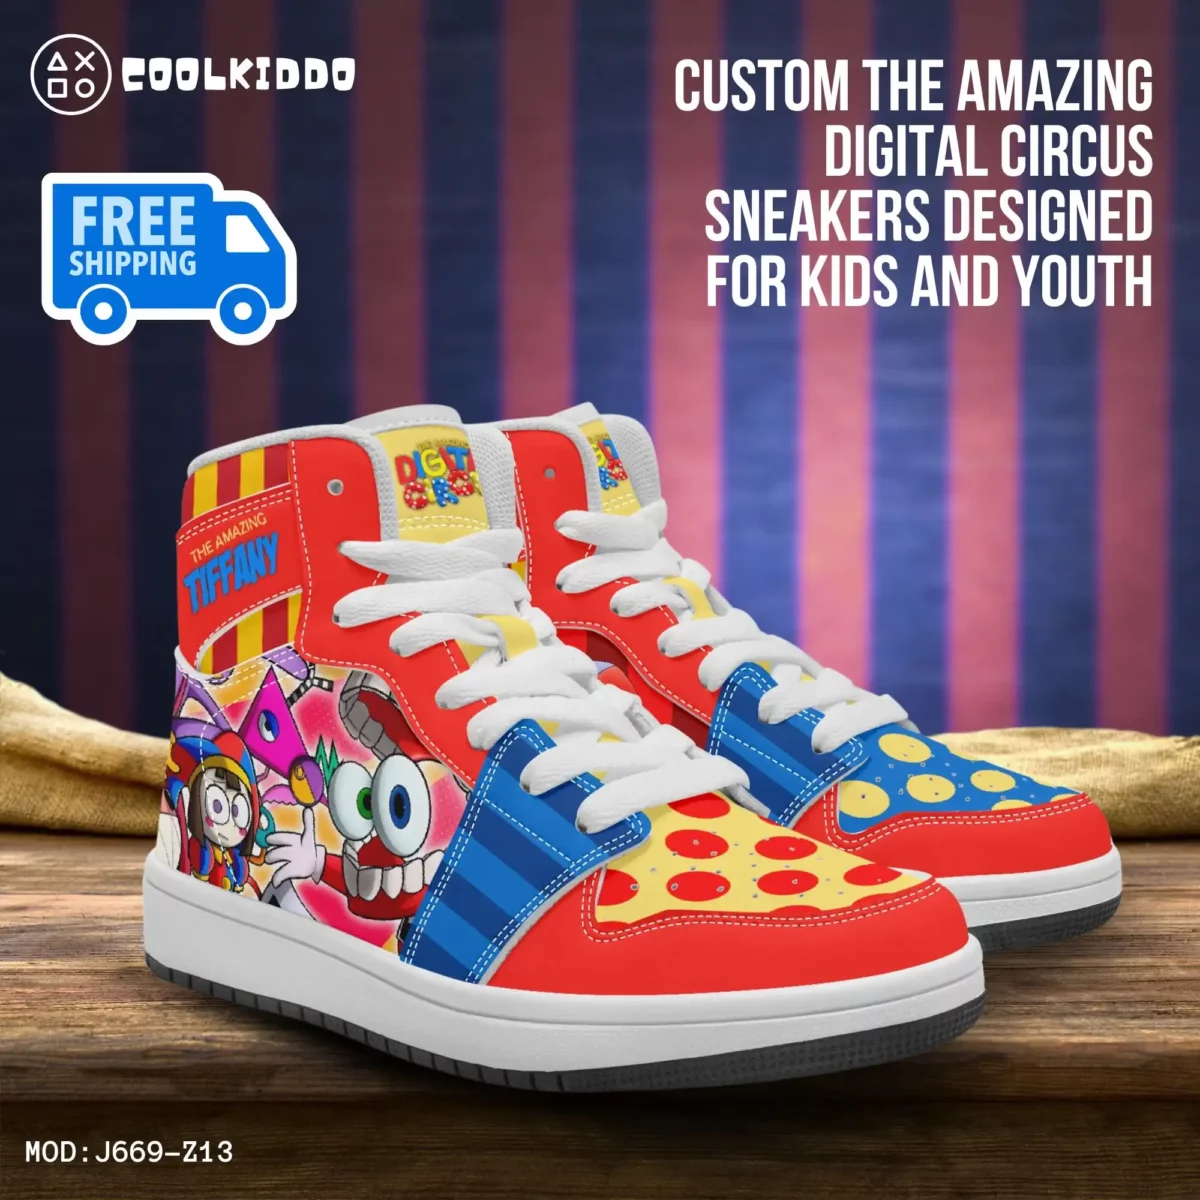 Personalized Name The Amazing Digital Circus Inspired High-Top Shoes, Leather Sneakers for Kids Cool Kiddo 10